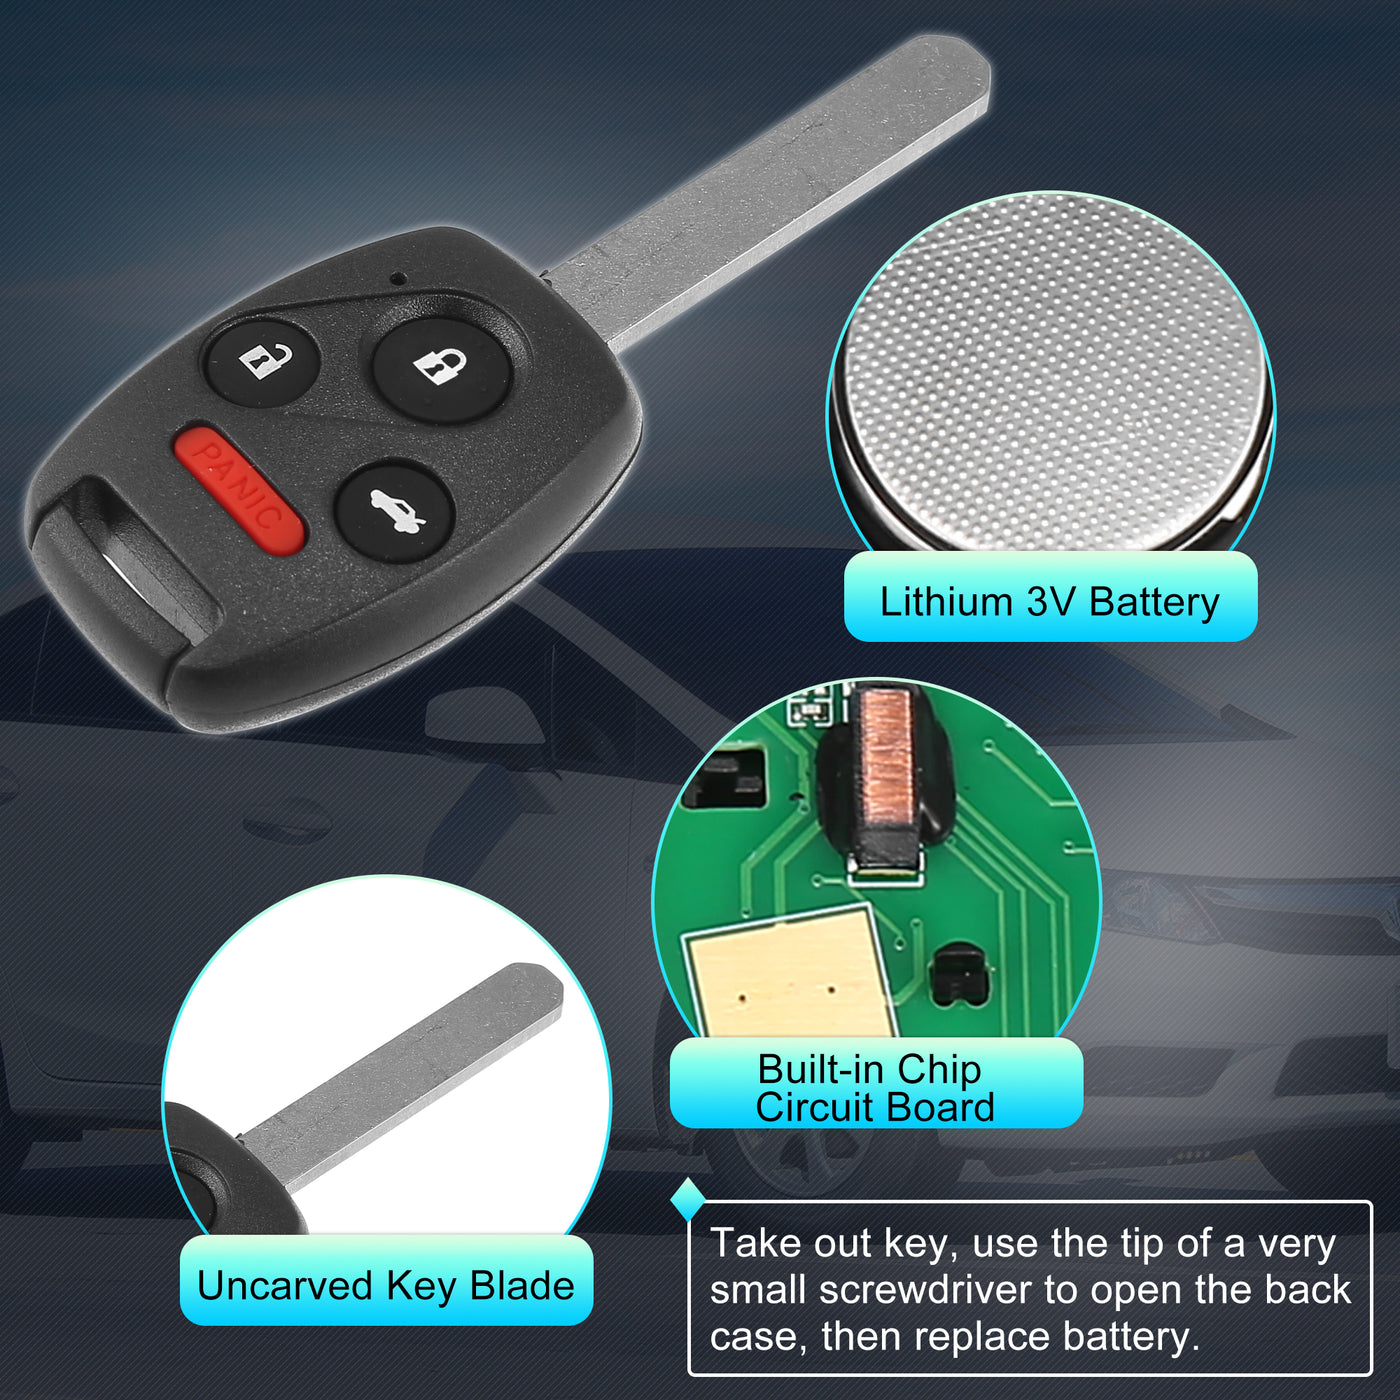 X AUTOHAUX 313.8MHz N5F-S0084A Replacement Smart Proximity Keyless Entry Remote Key Fob for Honda Civic for Acura MDX 2006-2013 4 Buttons Uncut Car Ignition Key 46 Chip